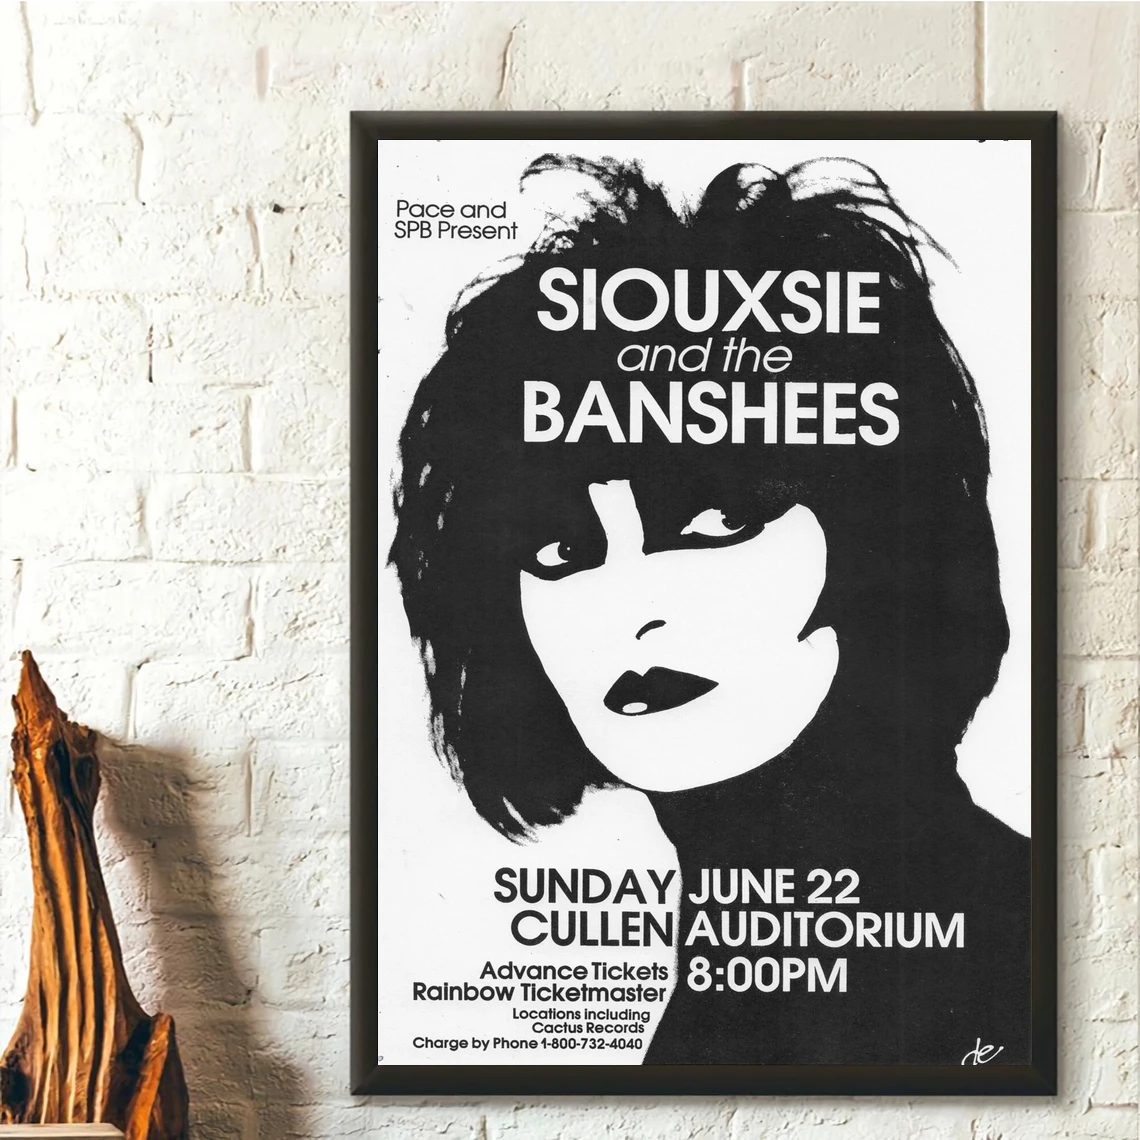 

Siouxsie And The Banshees - Cullen Auditorium Vintage Music Art Poster Canvas Prints Home Decoration Wall Painting (No Frame)